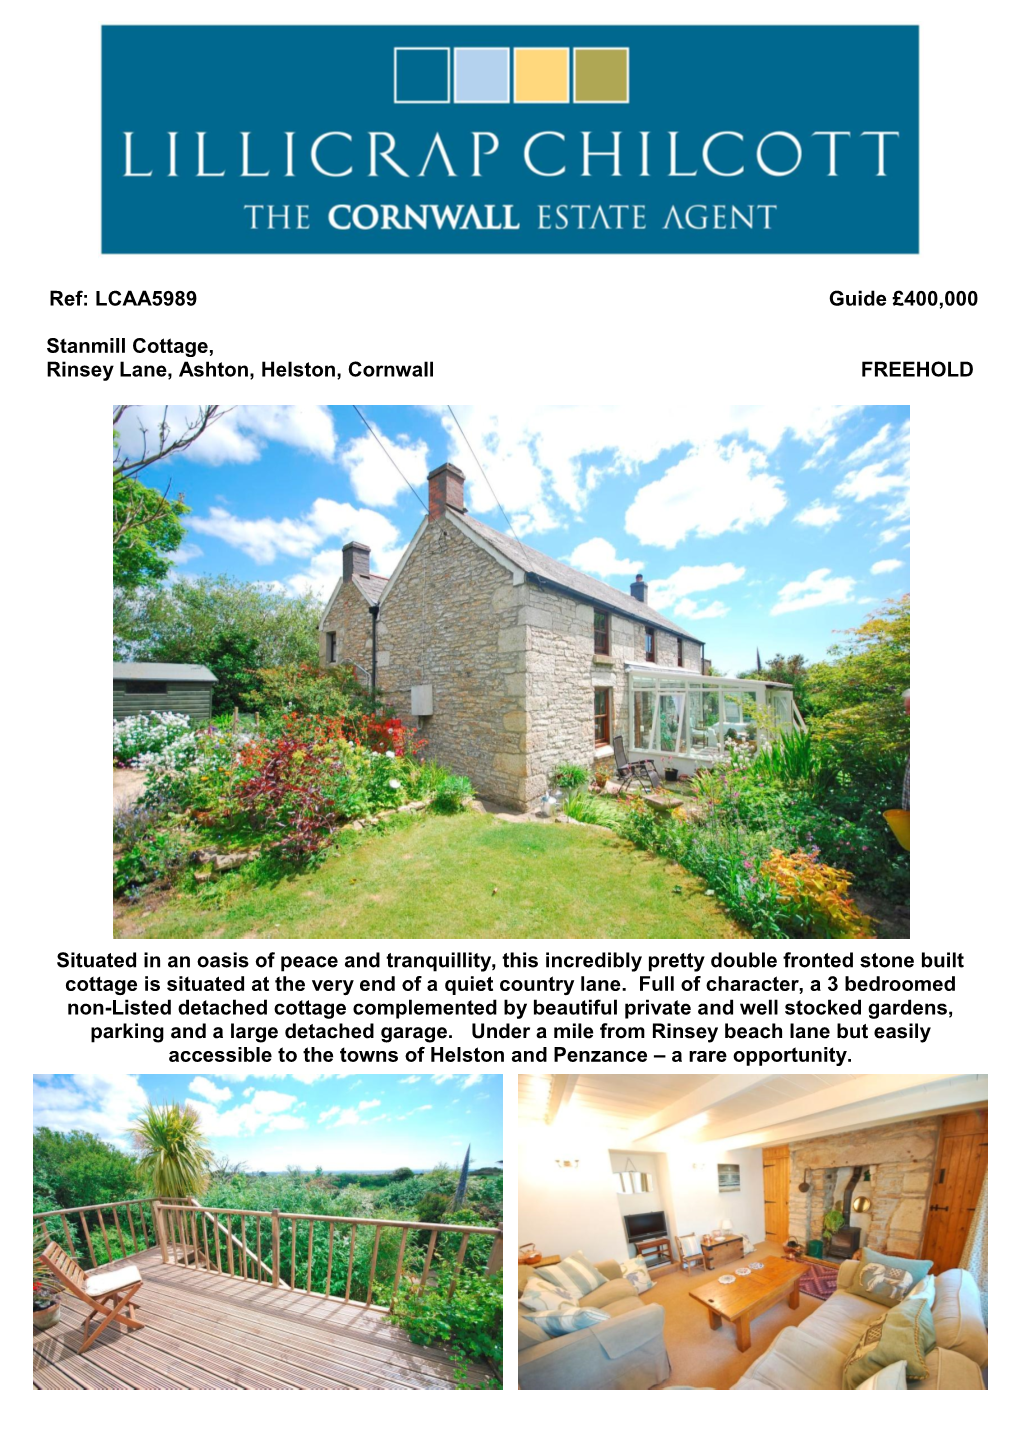 Ref: LCAA5989 Guide £400,000